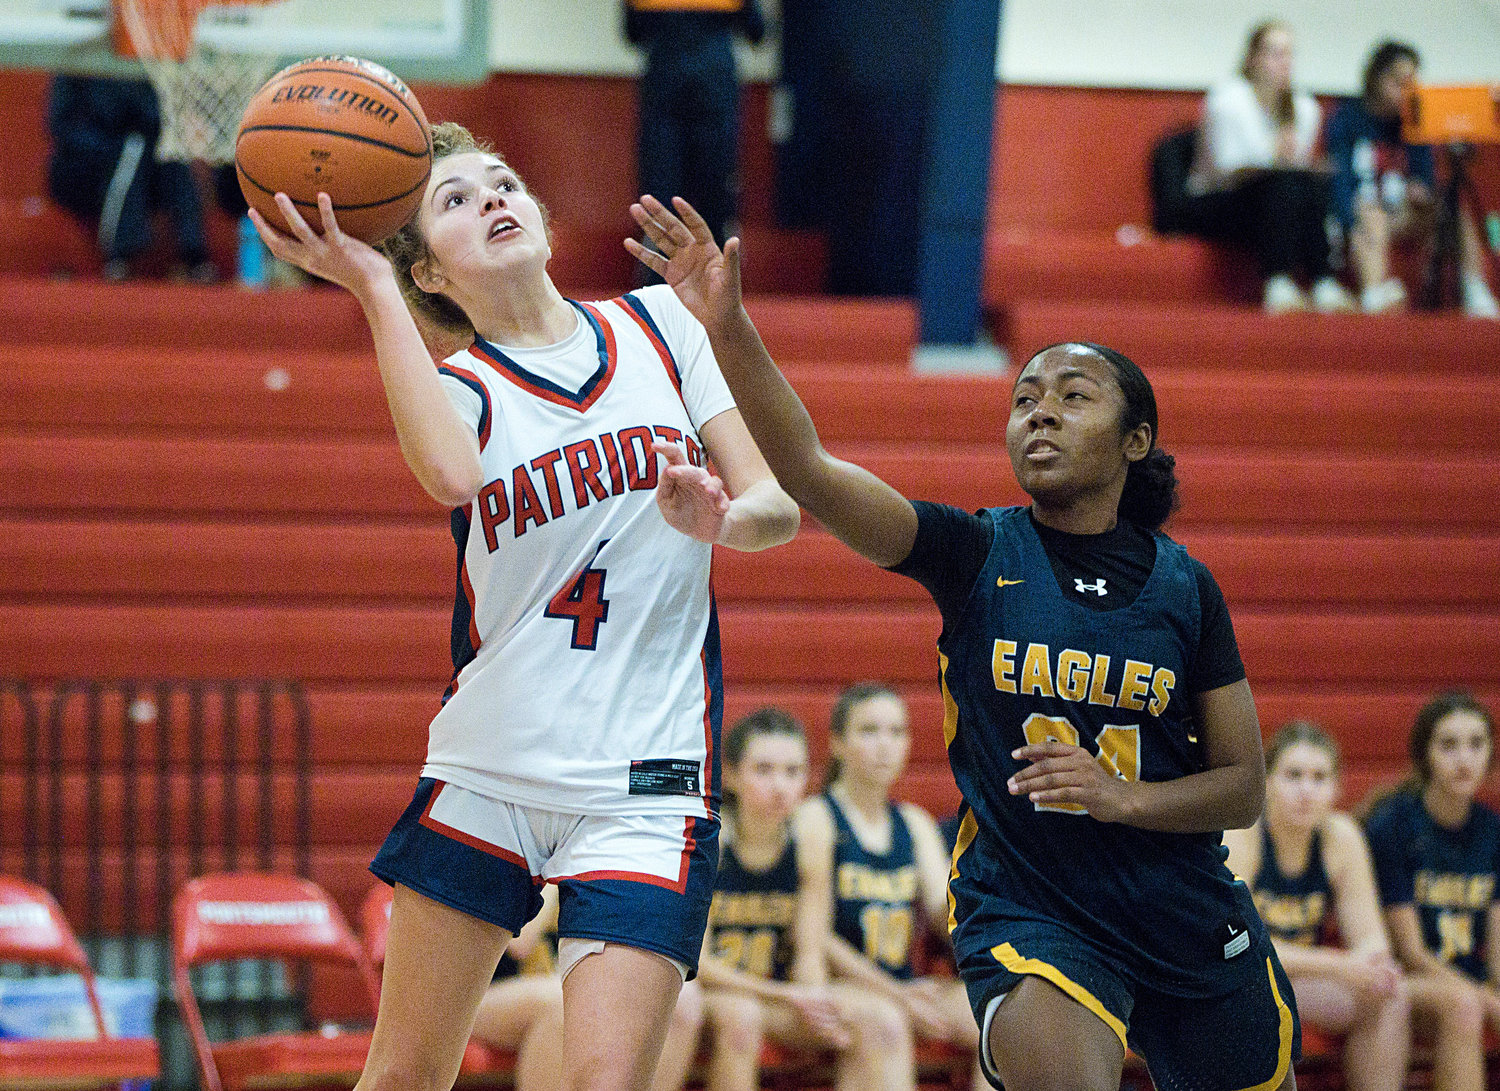 Portsmouth High’s Ava Moore is pressured by Barrington defender, Janaya Prince Baquero, while sending the ball up for a shot in Monday’s home game.